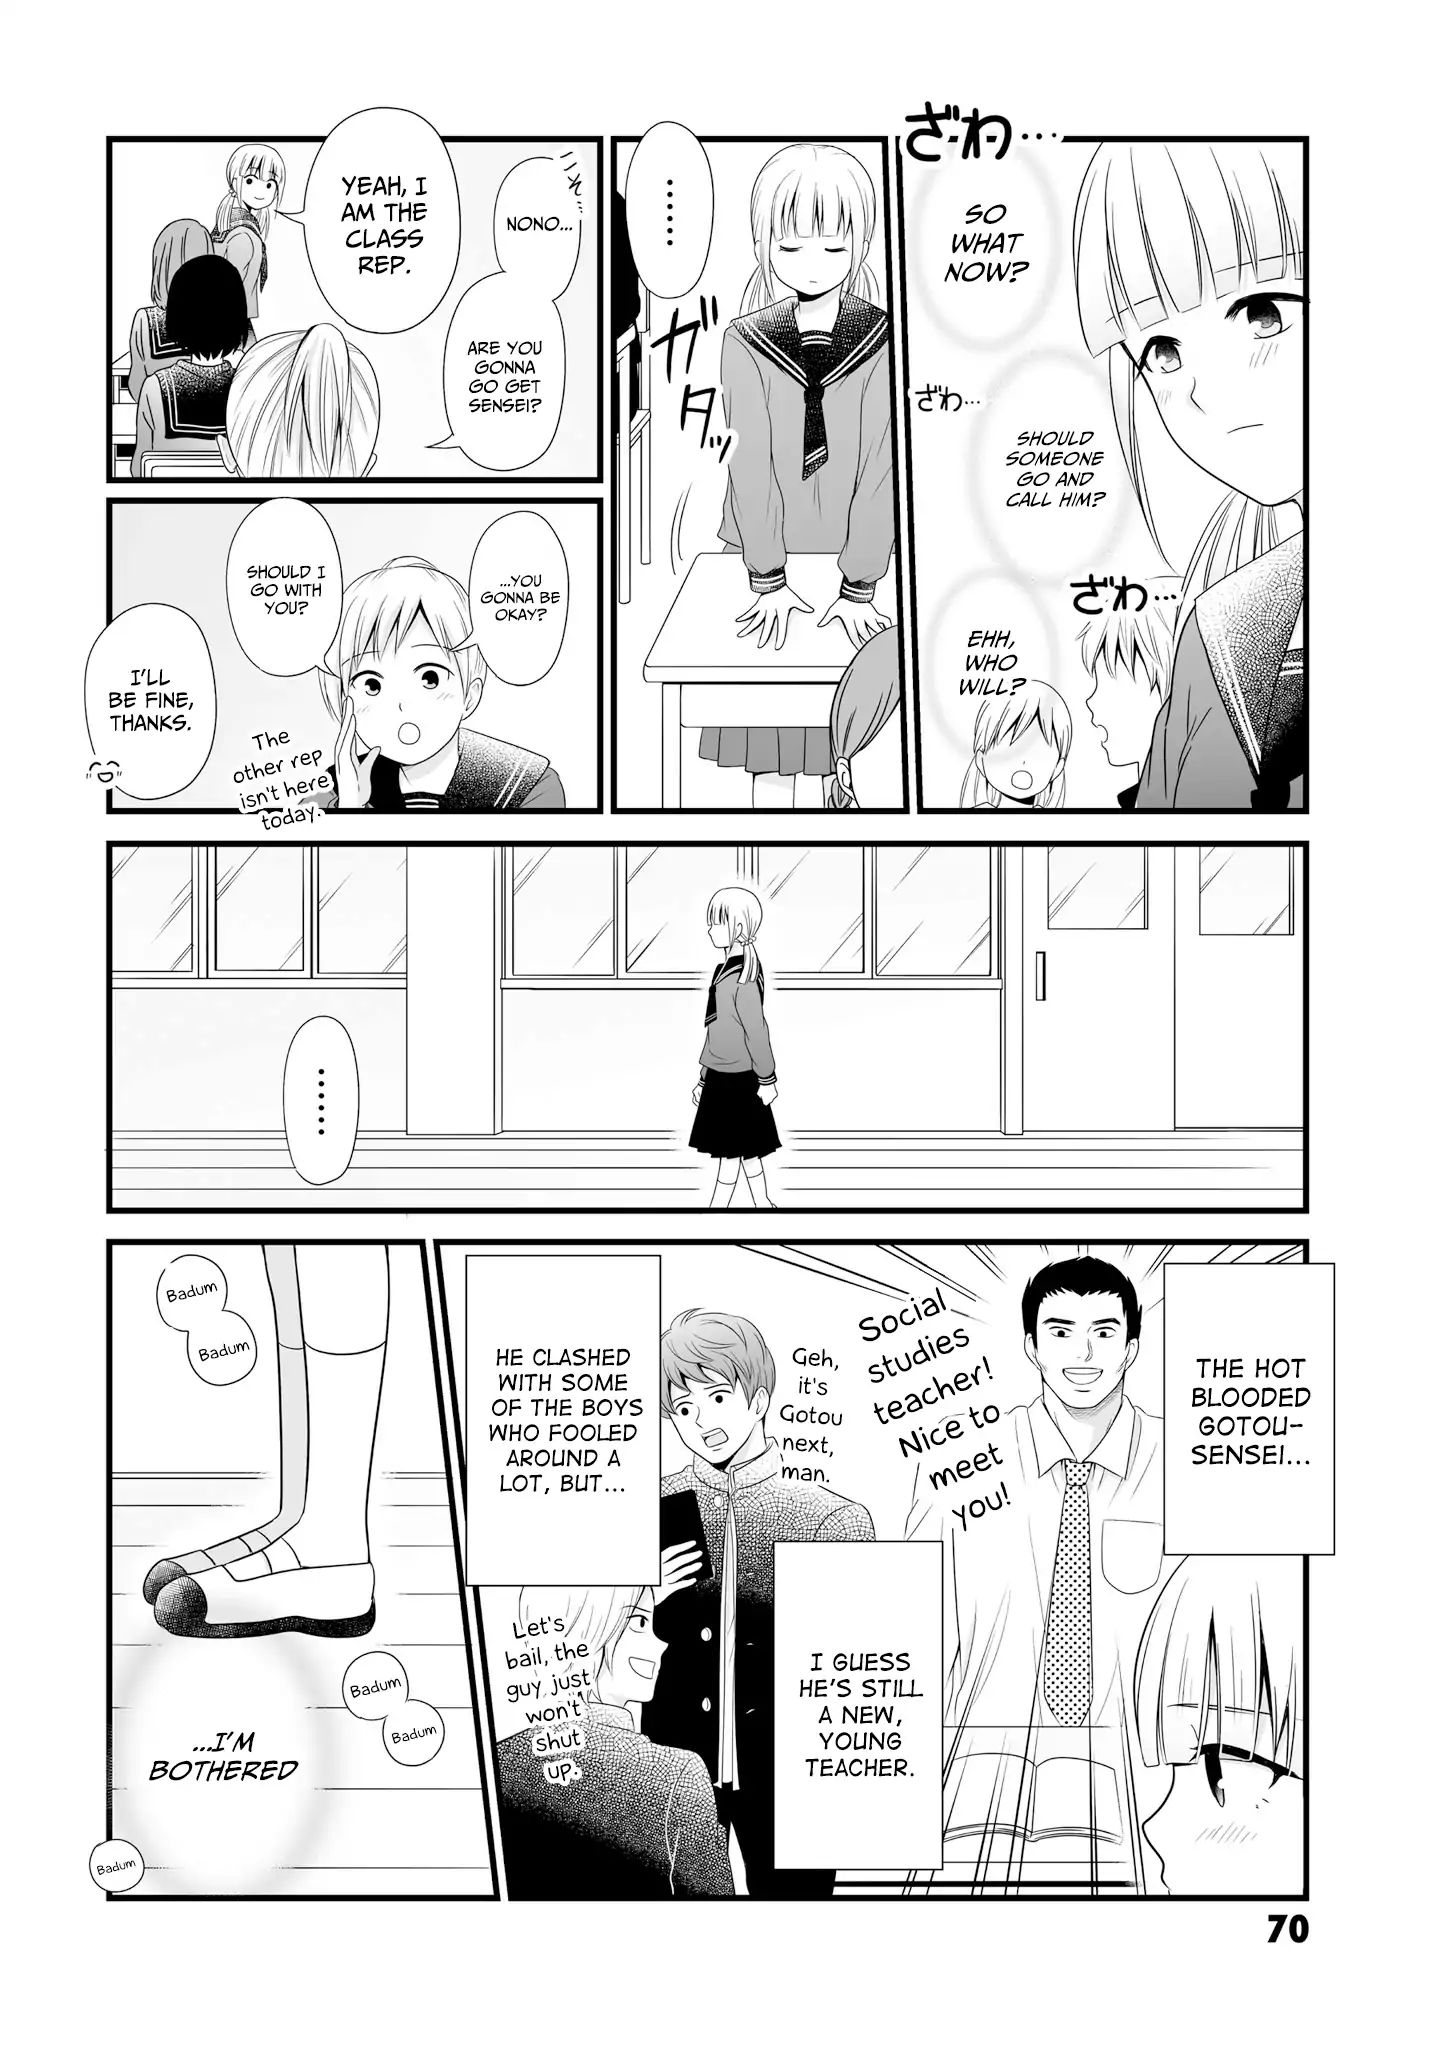 These Are Tiny Problems If You Compare Them To The Universe Vol.1 Chapter 14: The Teacher Who Left And The Class Rep - Picture 2